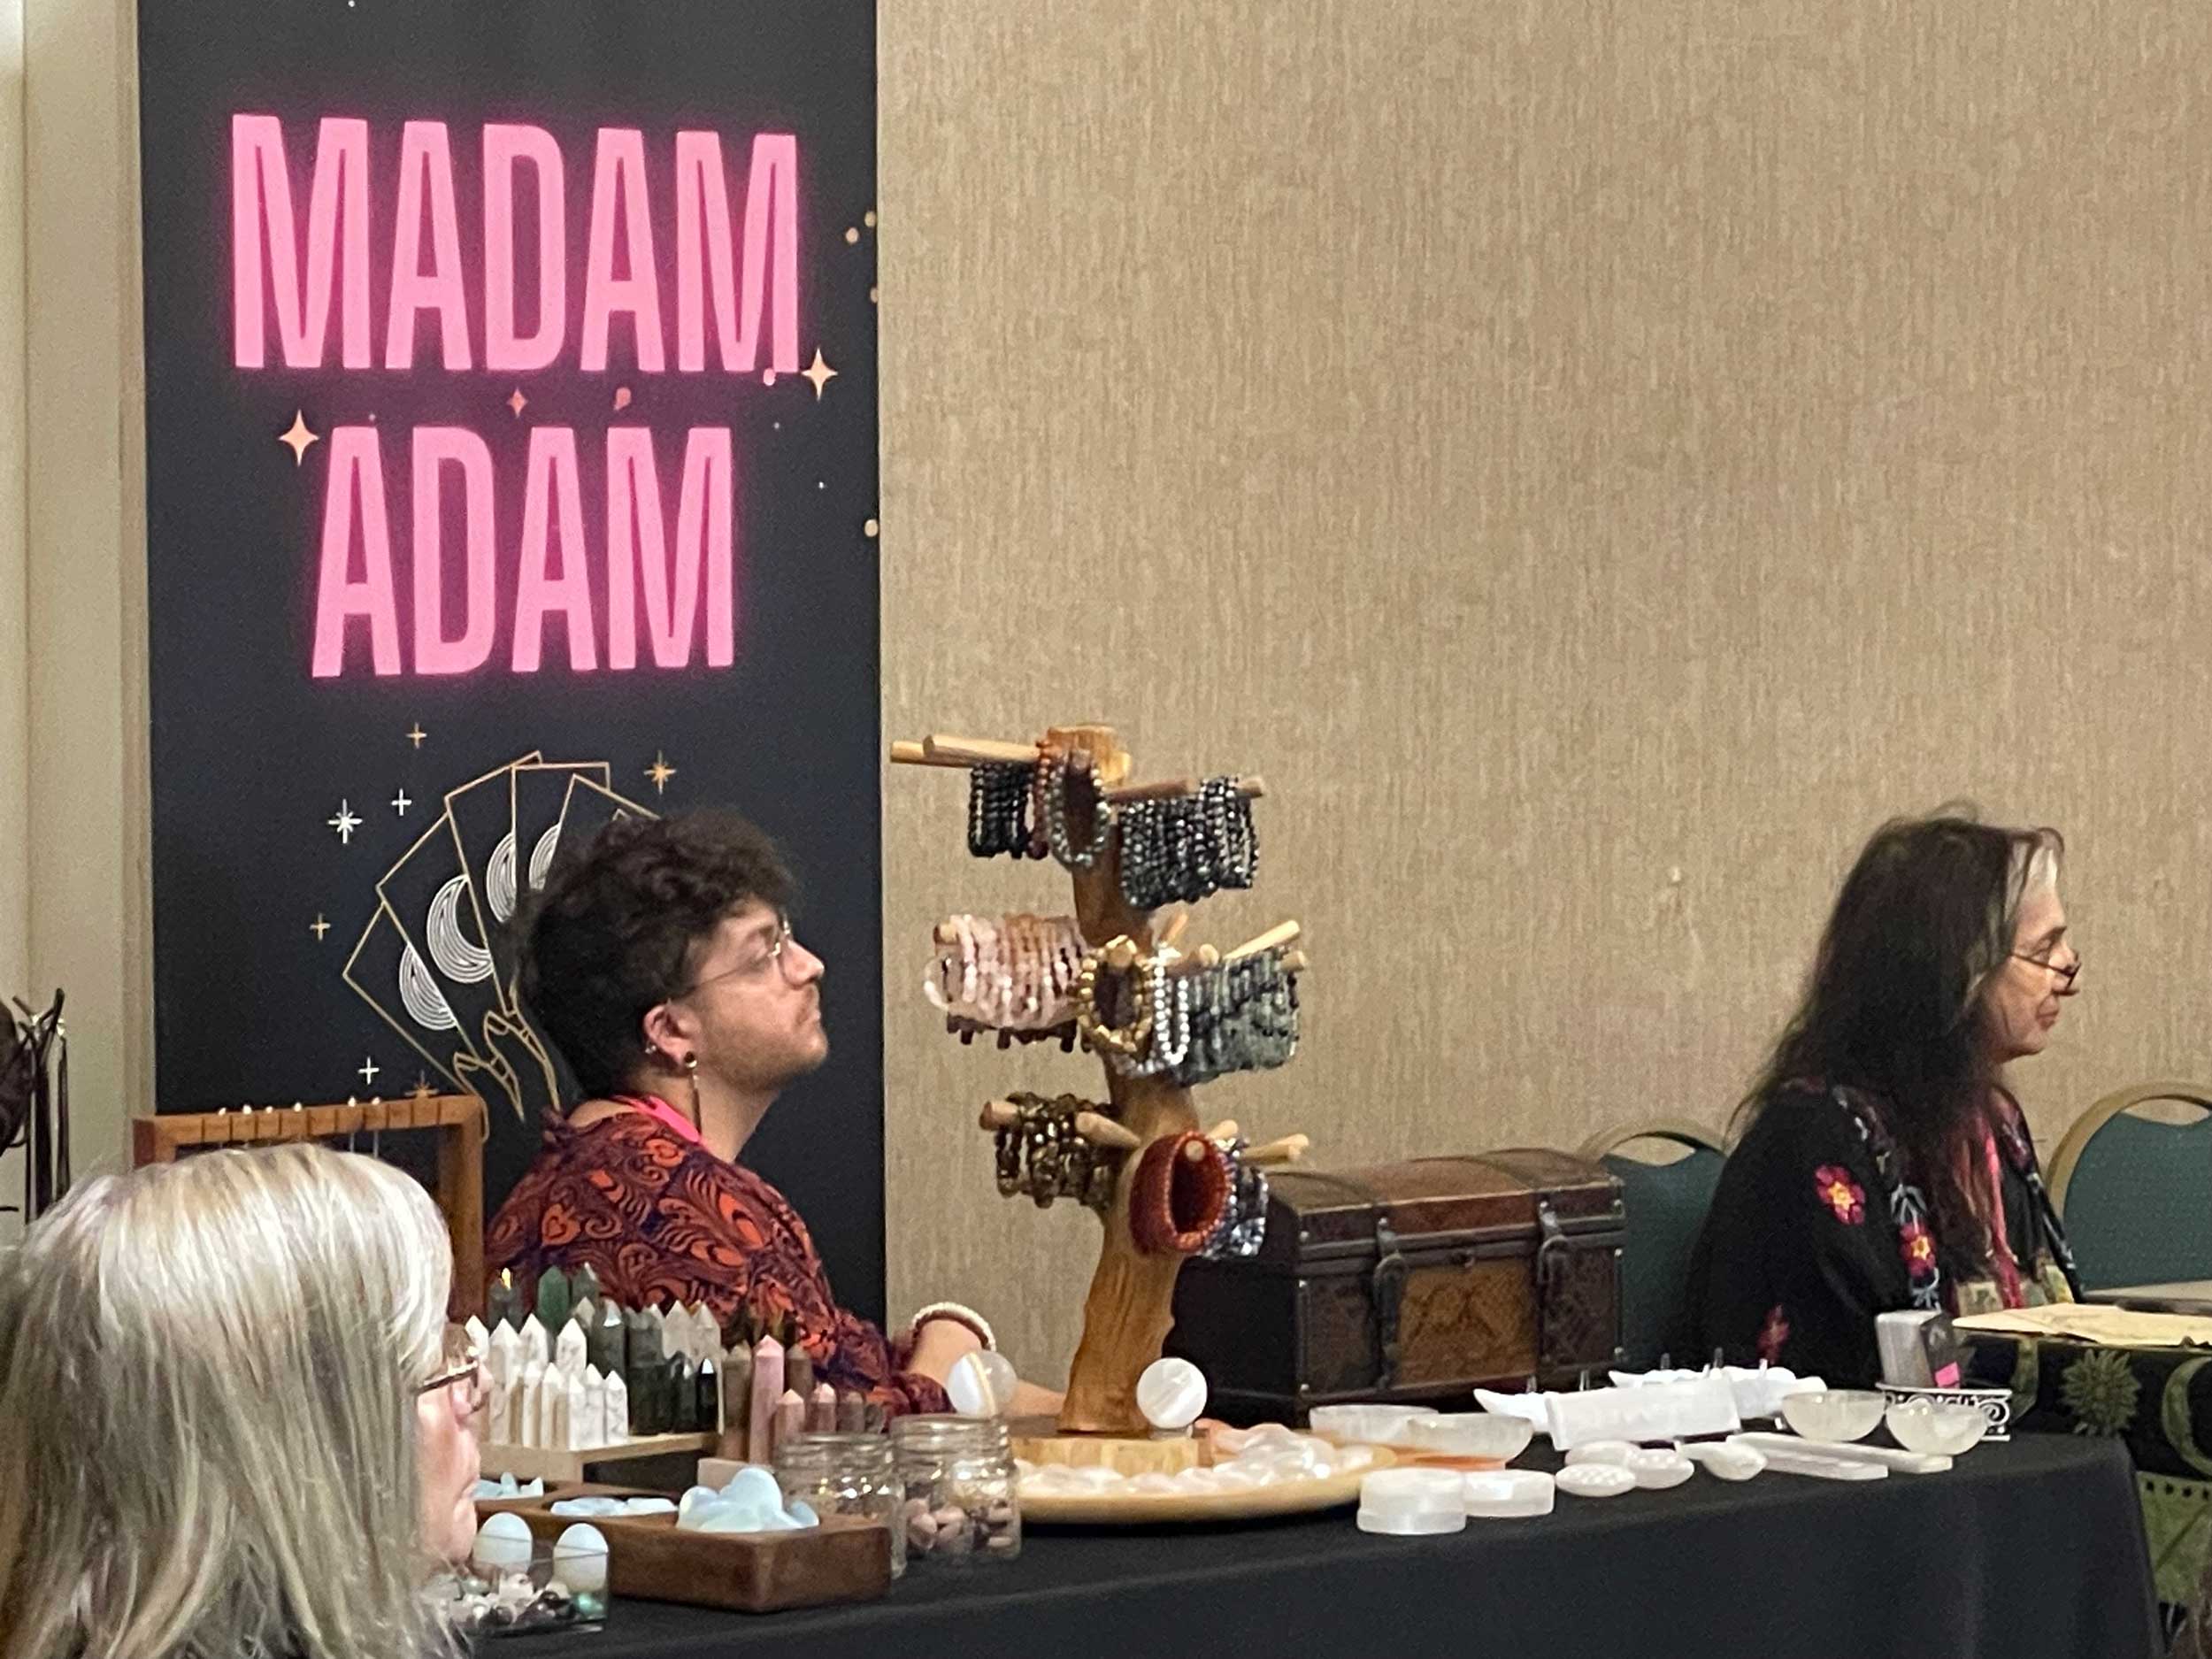 Madam Adam at their table at StaarCon 2023.